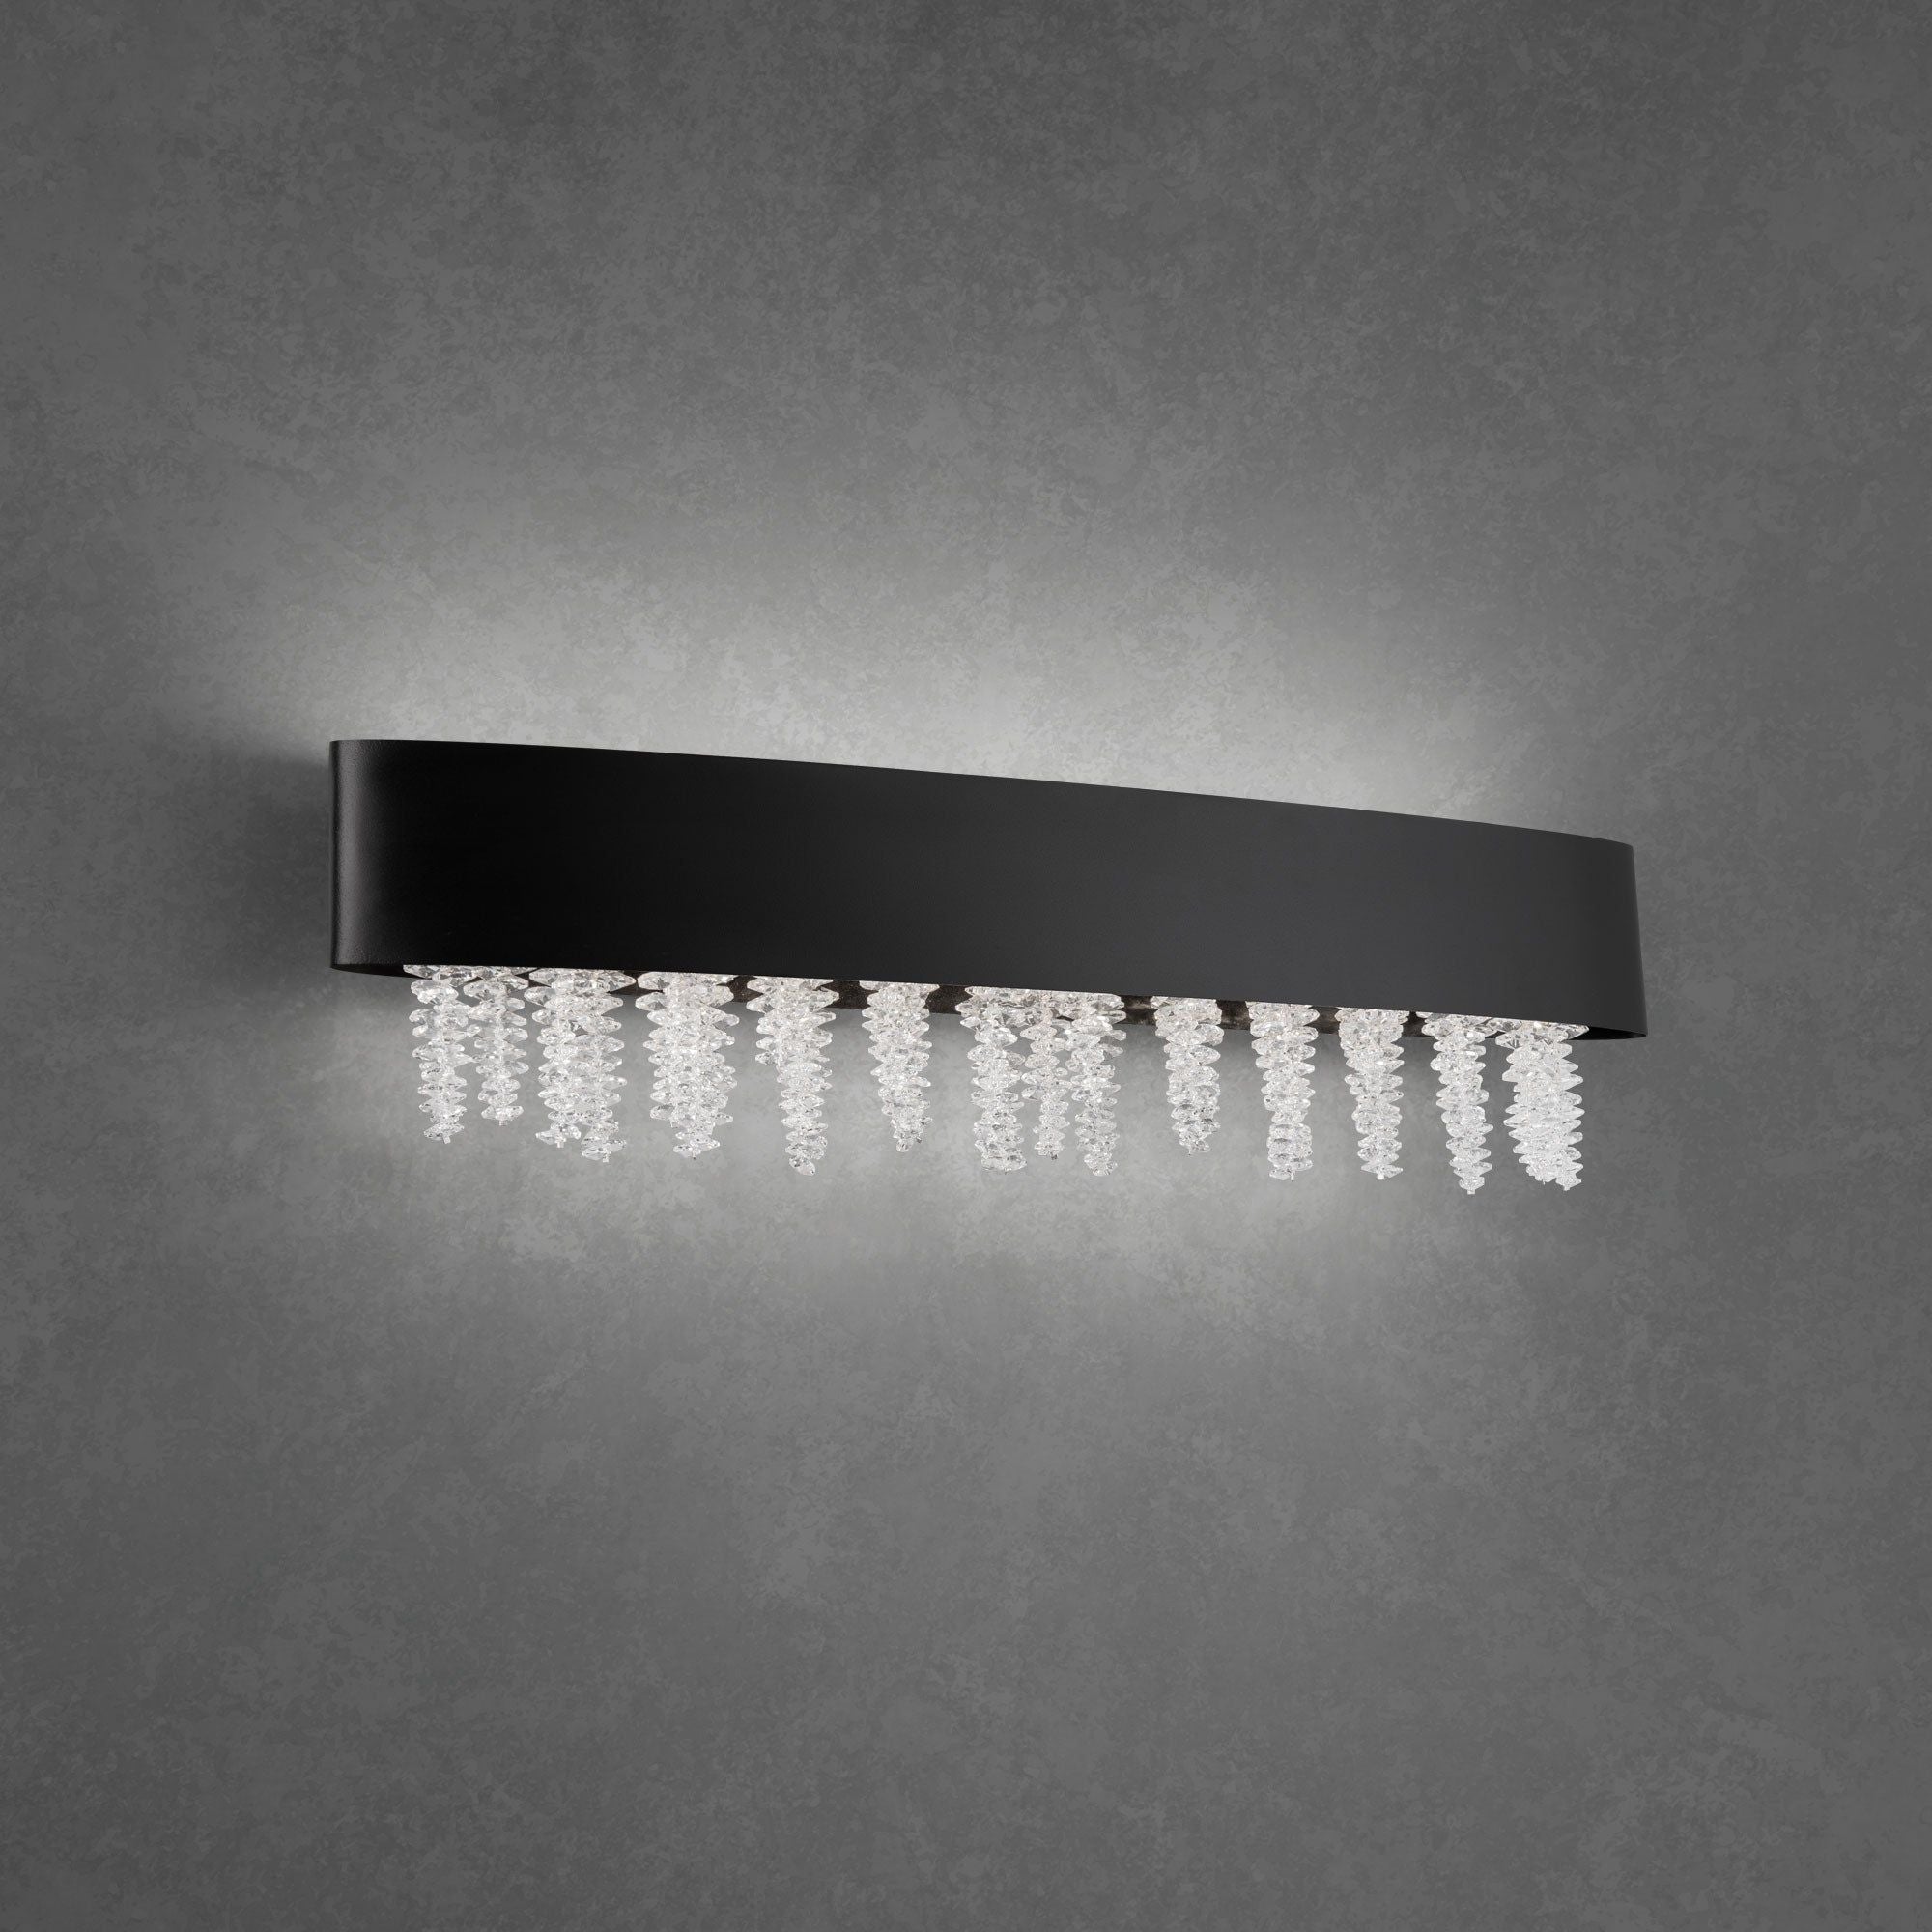 Soleil 27" LED Wall Sconce